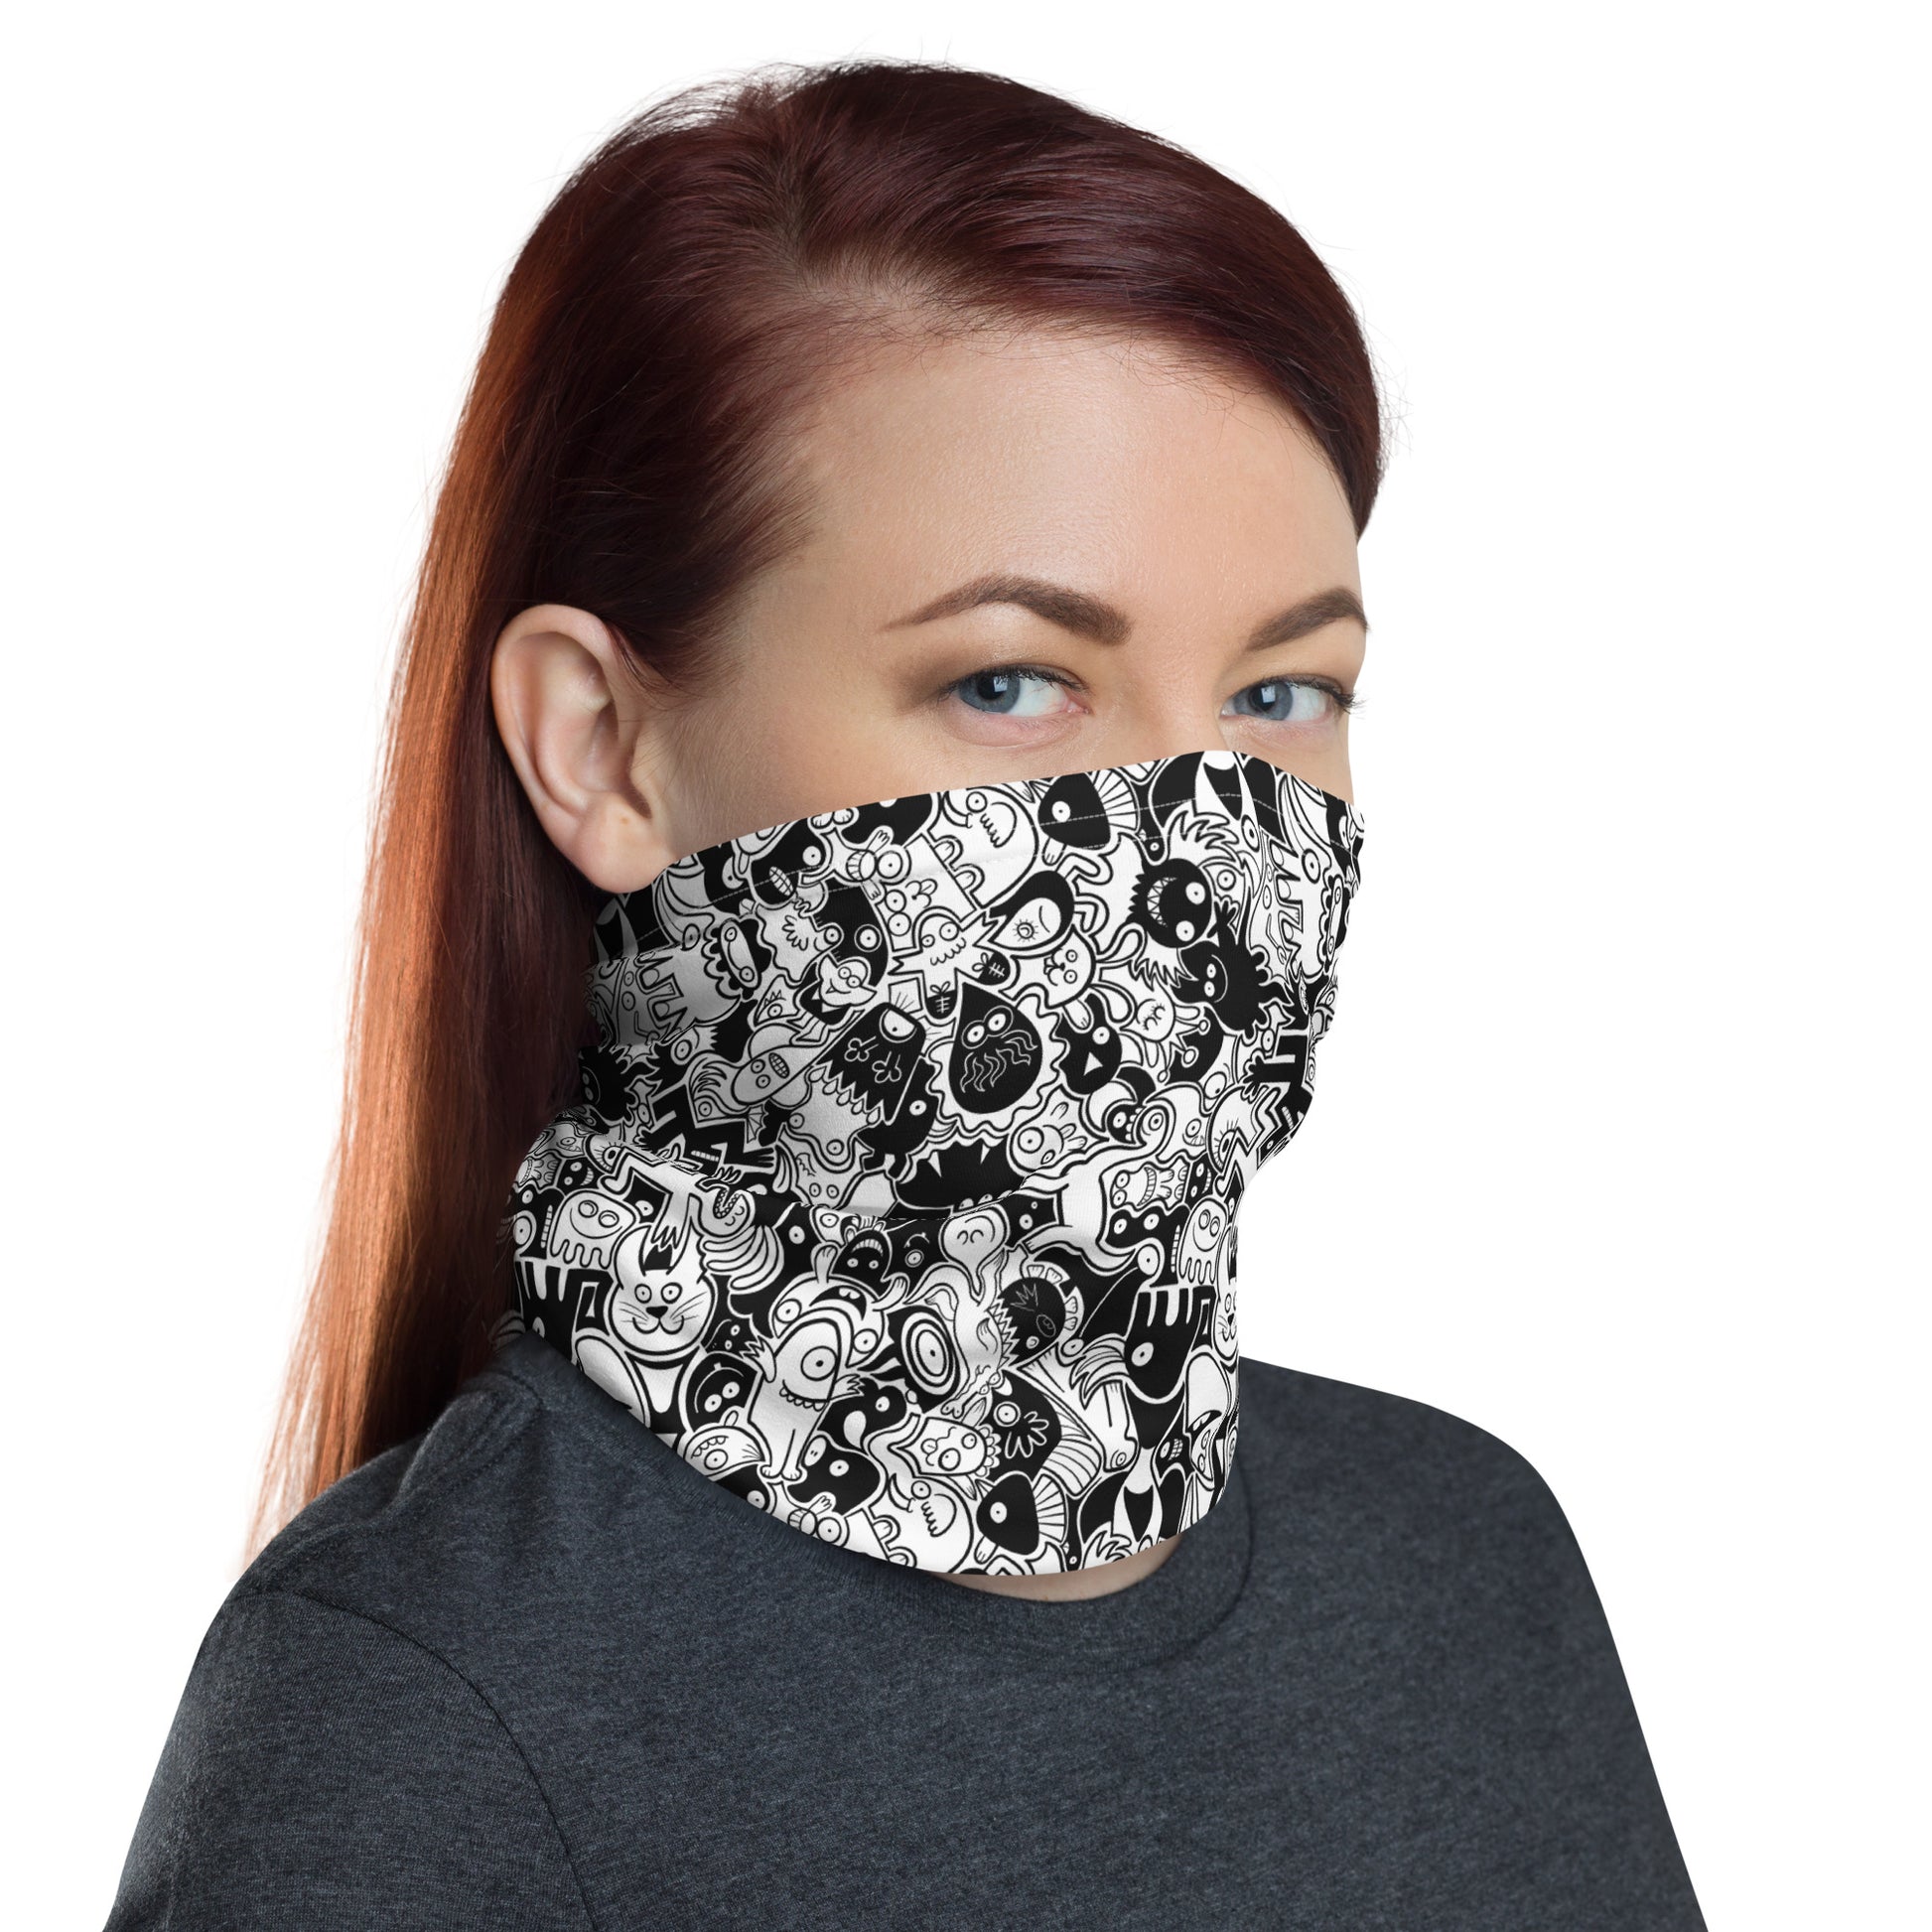 Beautiful woman wearing Neck Gaiter All-over printed with Joyful crowd of black and white doodle creatures. Neck warmer